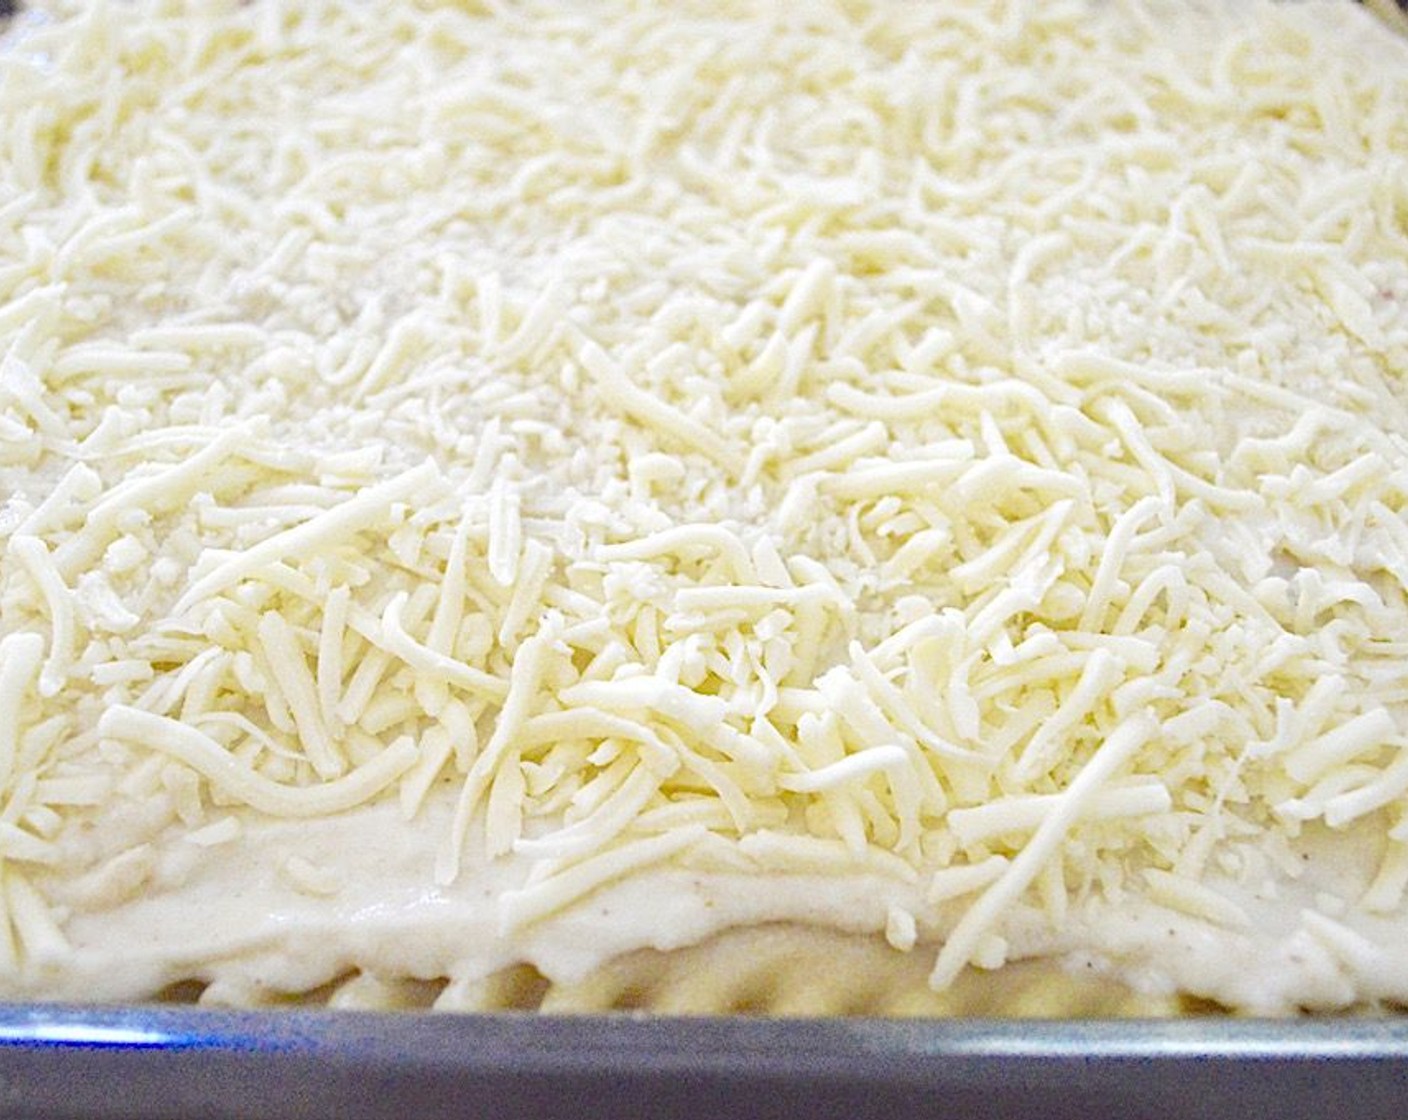 step 12 Repeat this layering twice more to have 3 layers total. Then lay out the final 4 lasagna noodles on top, followed by the remaining bechamel in a thick layer and the rest of the mozzarella.